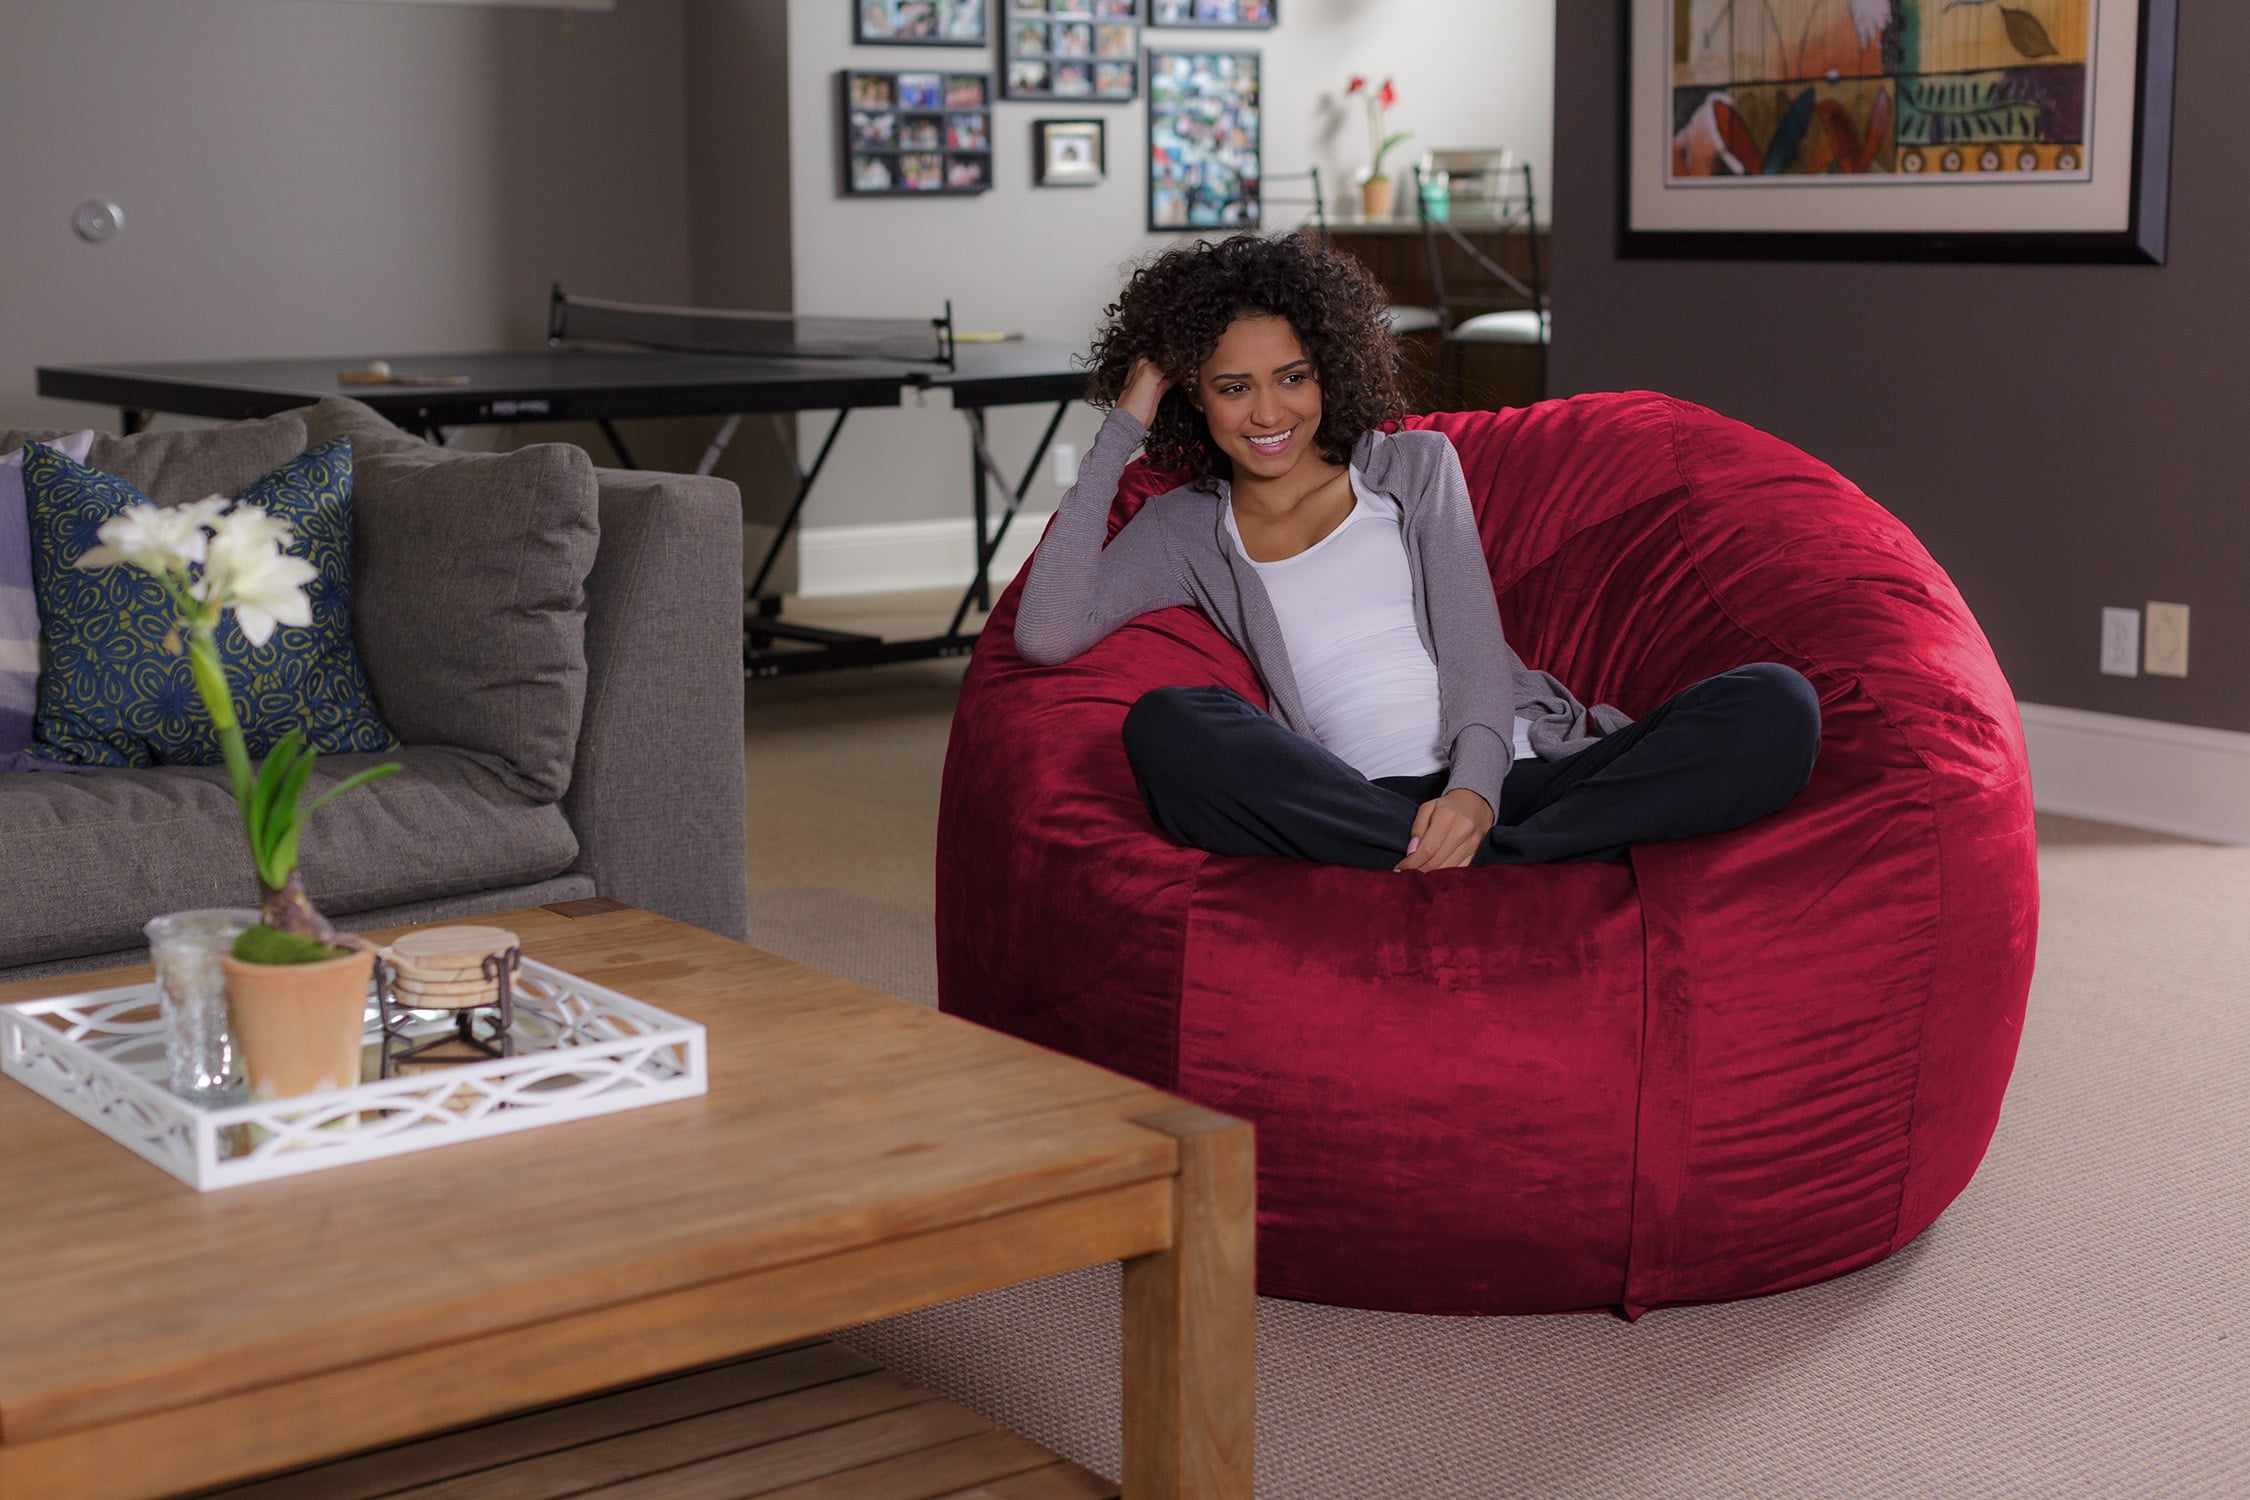 Big Huge Giant Bean Bag Chair for Adults, (No Filler) Bean Bag Chairs in Multiple Sizes and Colors Giant Foam-Filling Required- Machine Washable